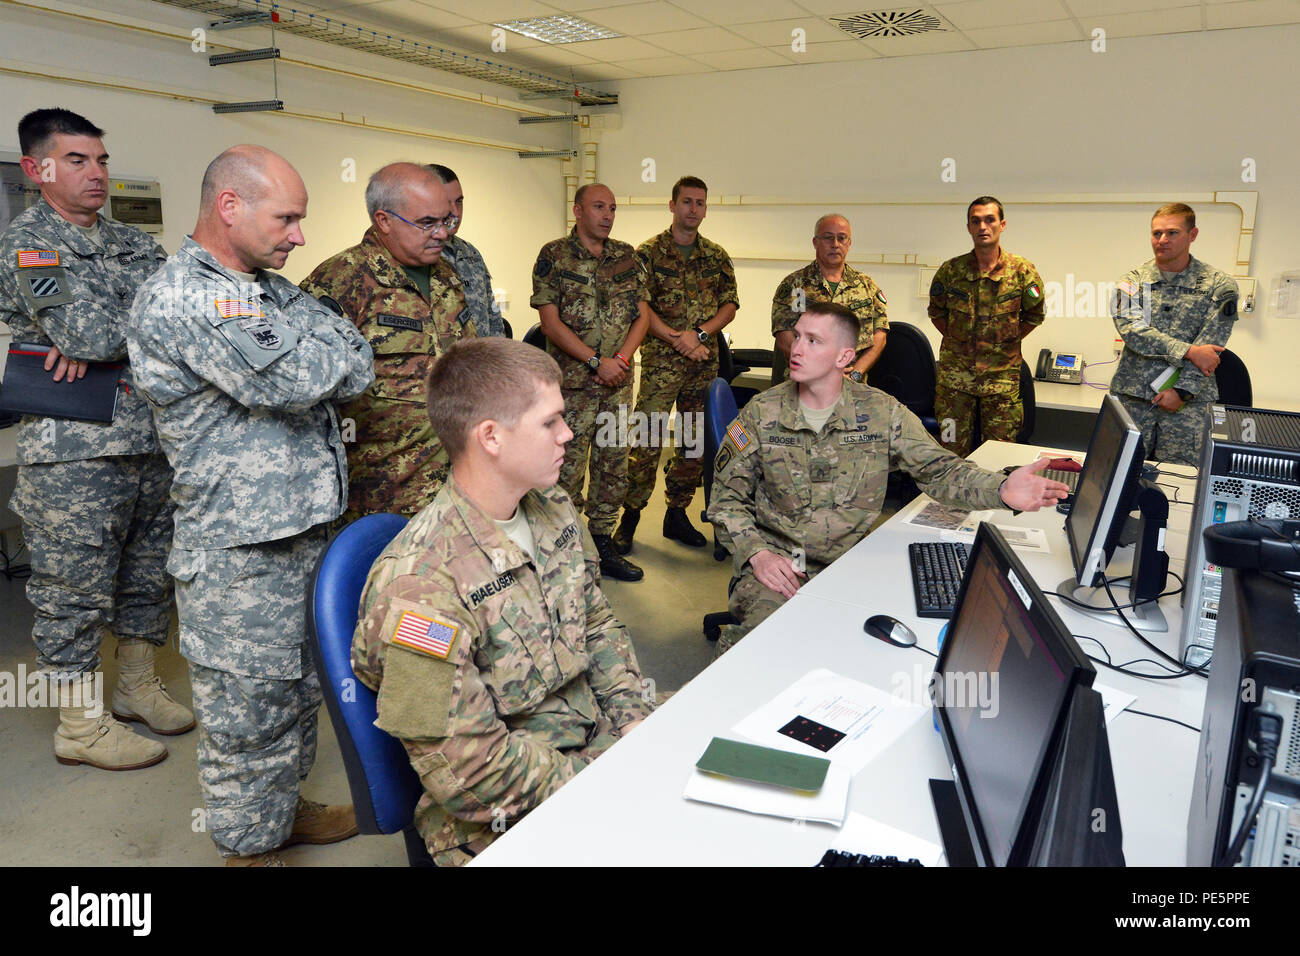 Brig. Gen. Christopher G. Cavoli, commander of the 7th Army Joint Multinational Training Command, and Brig. Gen. Salvatore Polimeno, commander of exercise CE.SI.VA observe NIE 16.1 (Network Integration Evaluation 16.1) exercise with U.S. and Italian Soldiers at Caserma Ederle Vicenza, Italy, Sept. 28, 2015. The NIE 16.1 is a multi-nation exercise designed to increase interoperability and communication between U.S. and NATO Friendly Force. (U.S. Army photo by Visual Information Specialist Paolo Bovo/released) Stock Photo